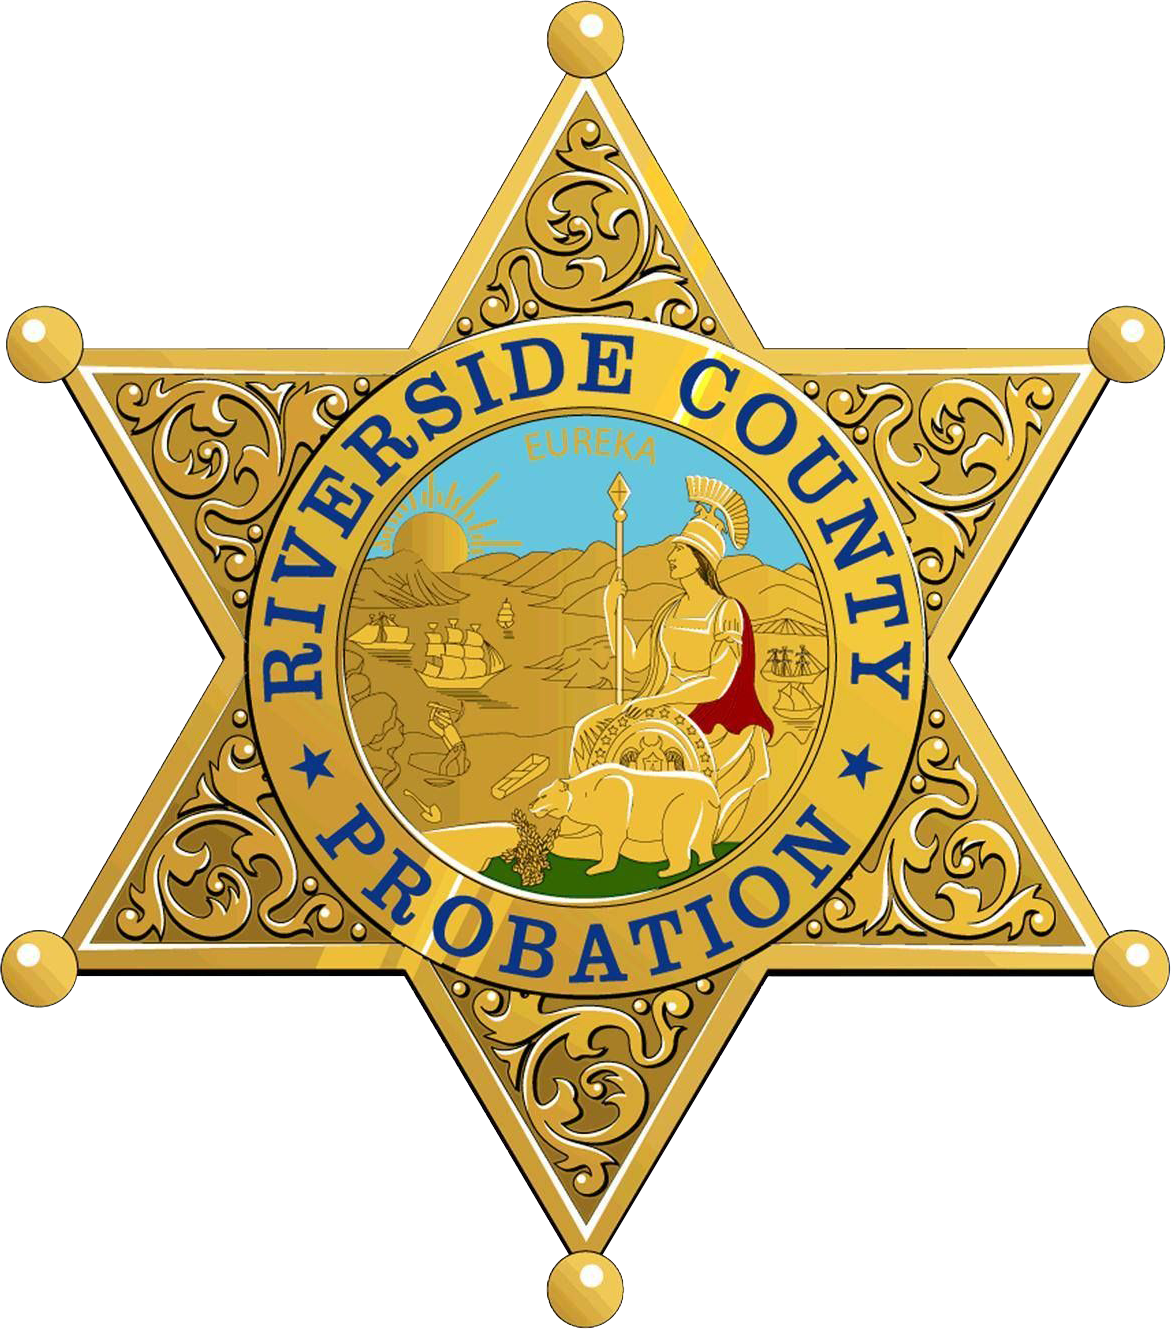 Riverside County Probation Department Joins Fellow California Probation Departments in Implementing eSOPH Background Investigation Software